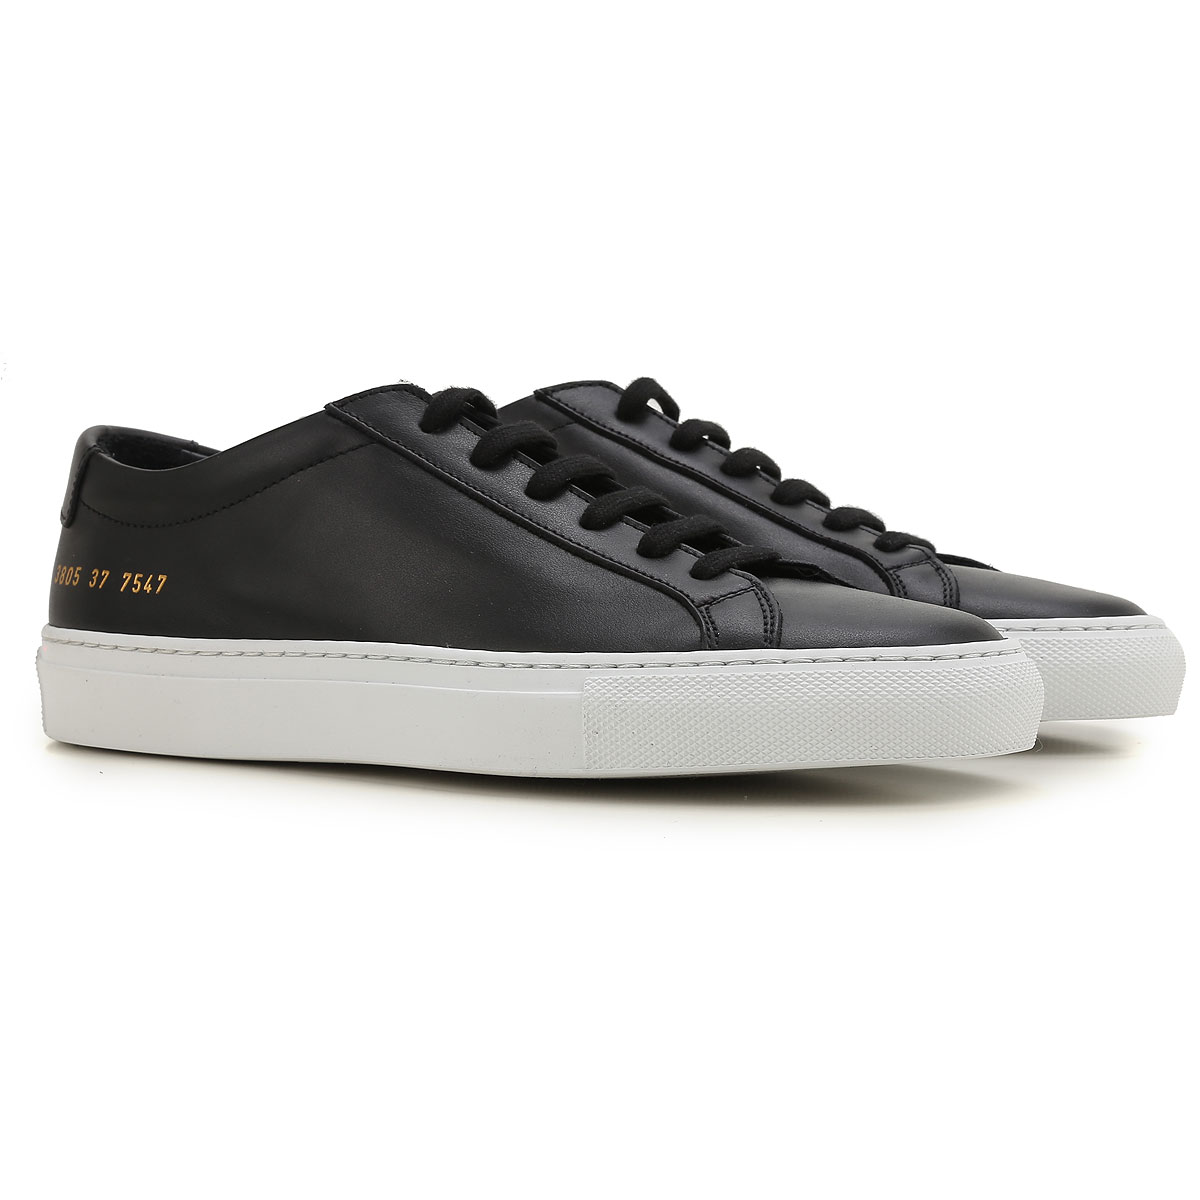 Womens Shoes Woman by Common Projects, Style code: 3805-7547-